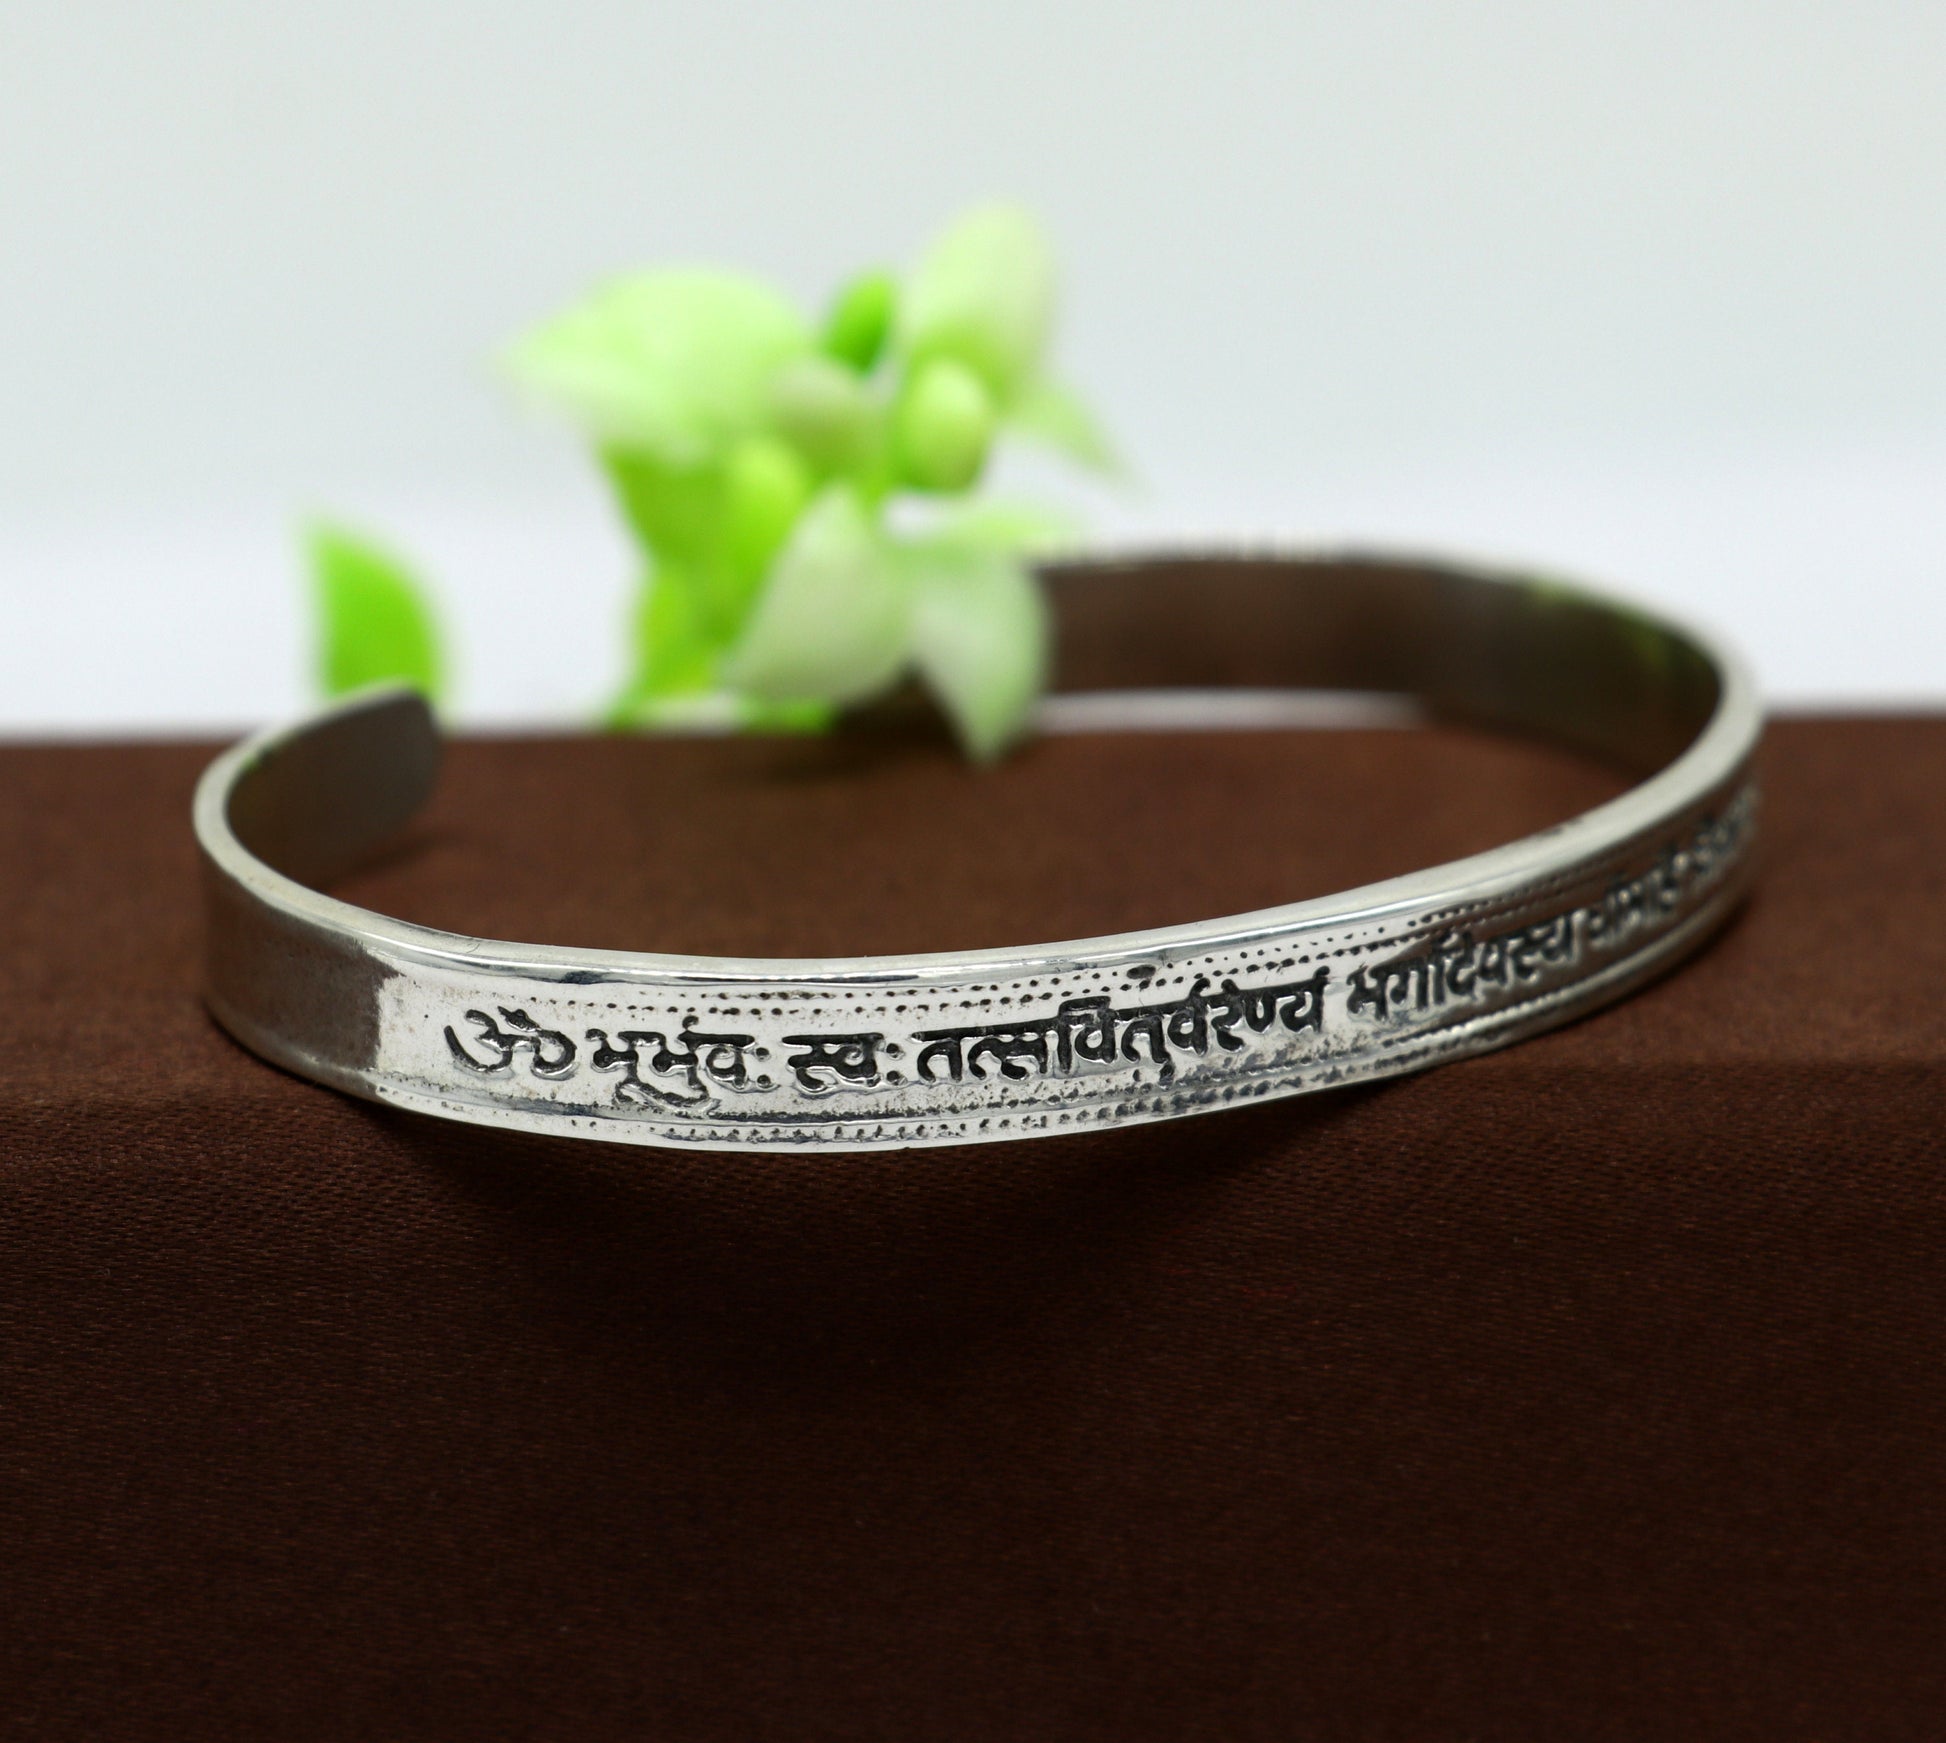 Authentic 925 sterling silver customized Gayatri Mantra design cuff kada bracelet, easy to adjust with your wrist, unisex jewelry cuff45 - TRIBAL ORNAMENTS